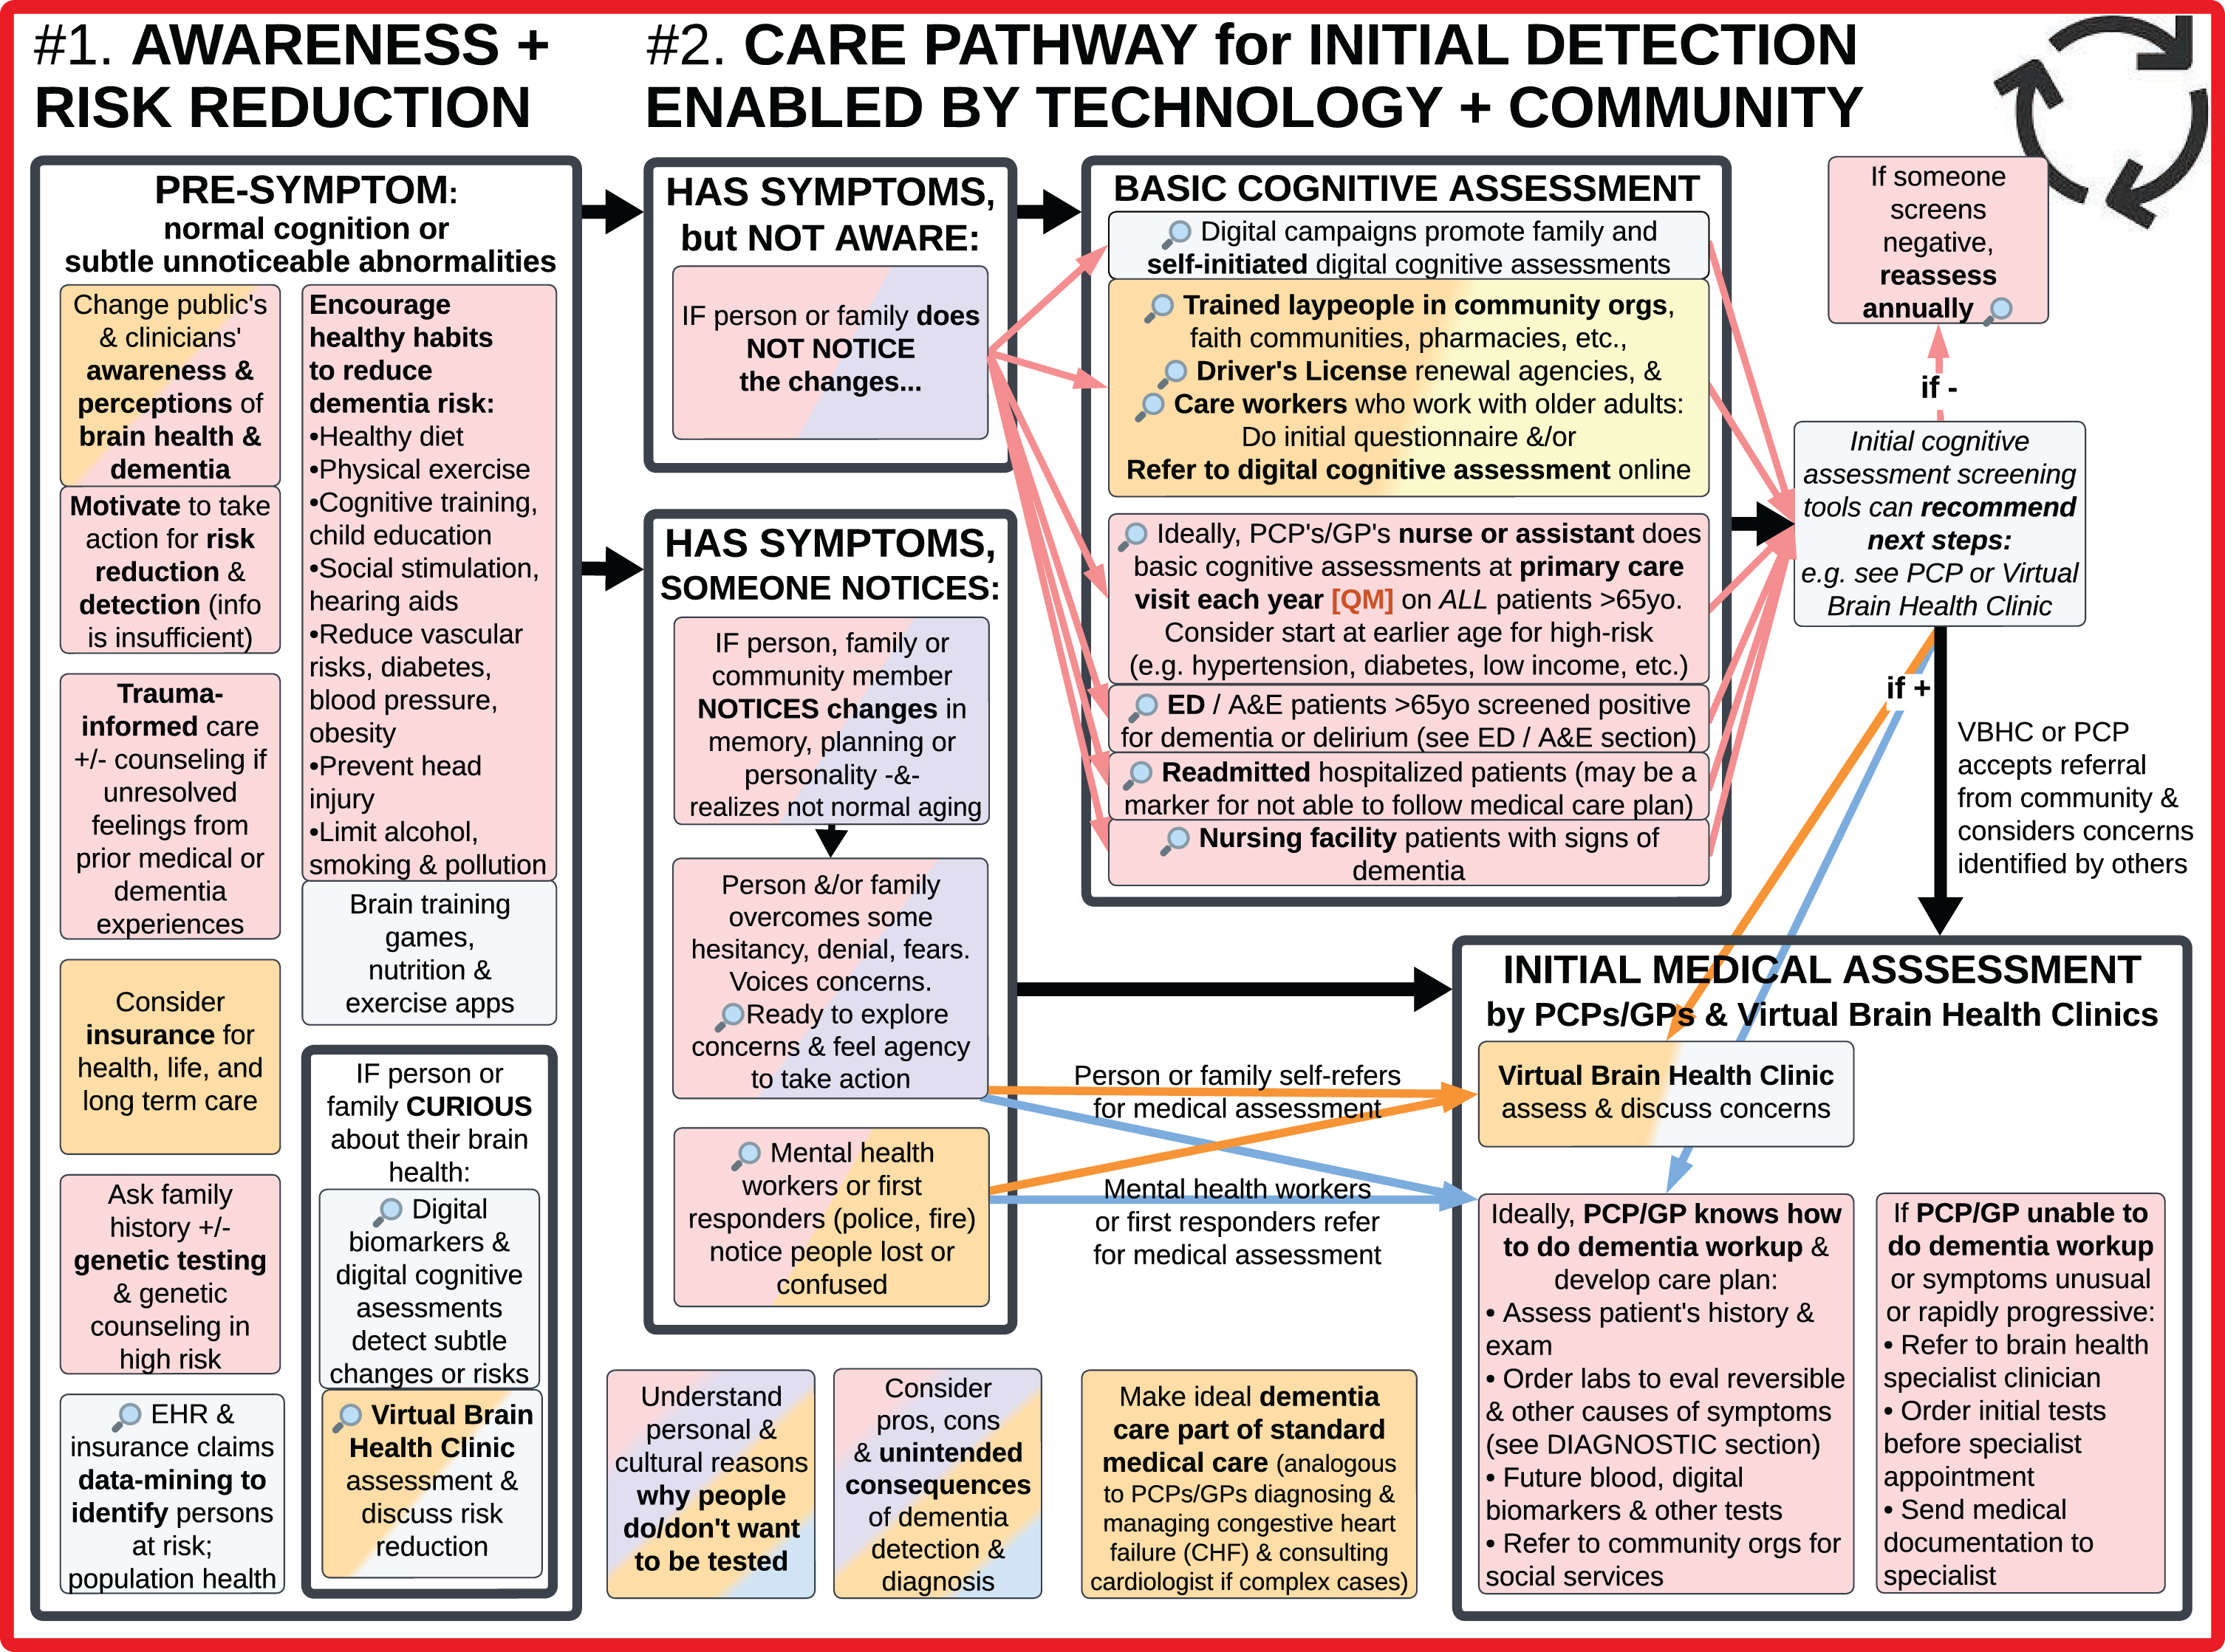 #1. Increase Awareness of Brain Health, Dementia, and Risk Reduction Among Individuals, Families, and Clinicians (left); #2. Enhanced Care Pathway for Initial Detection Enabled by Technology and Community (right).